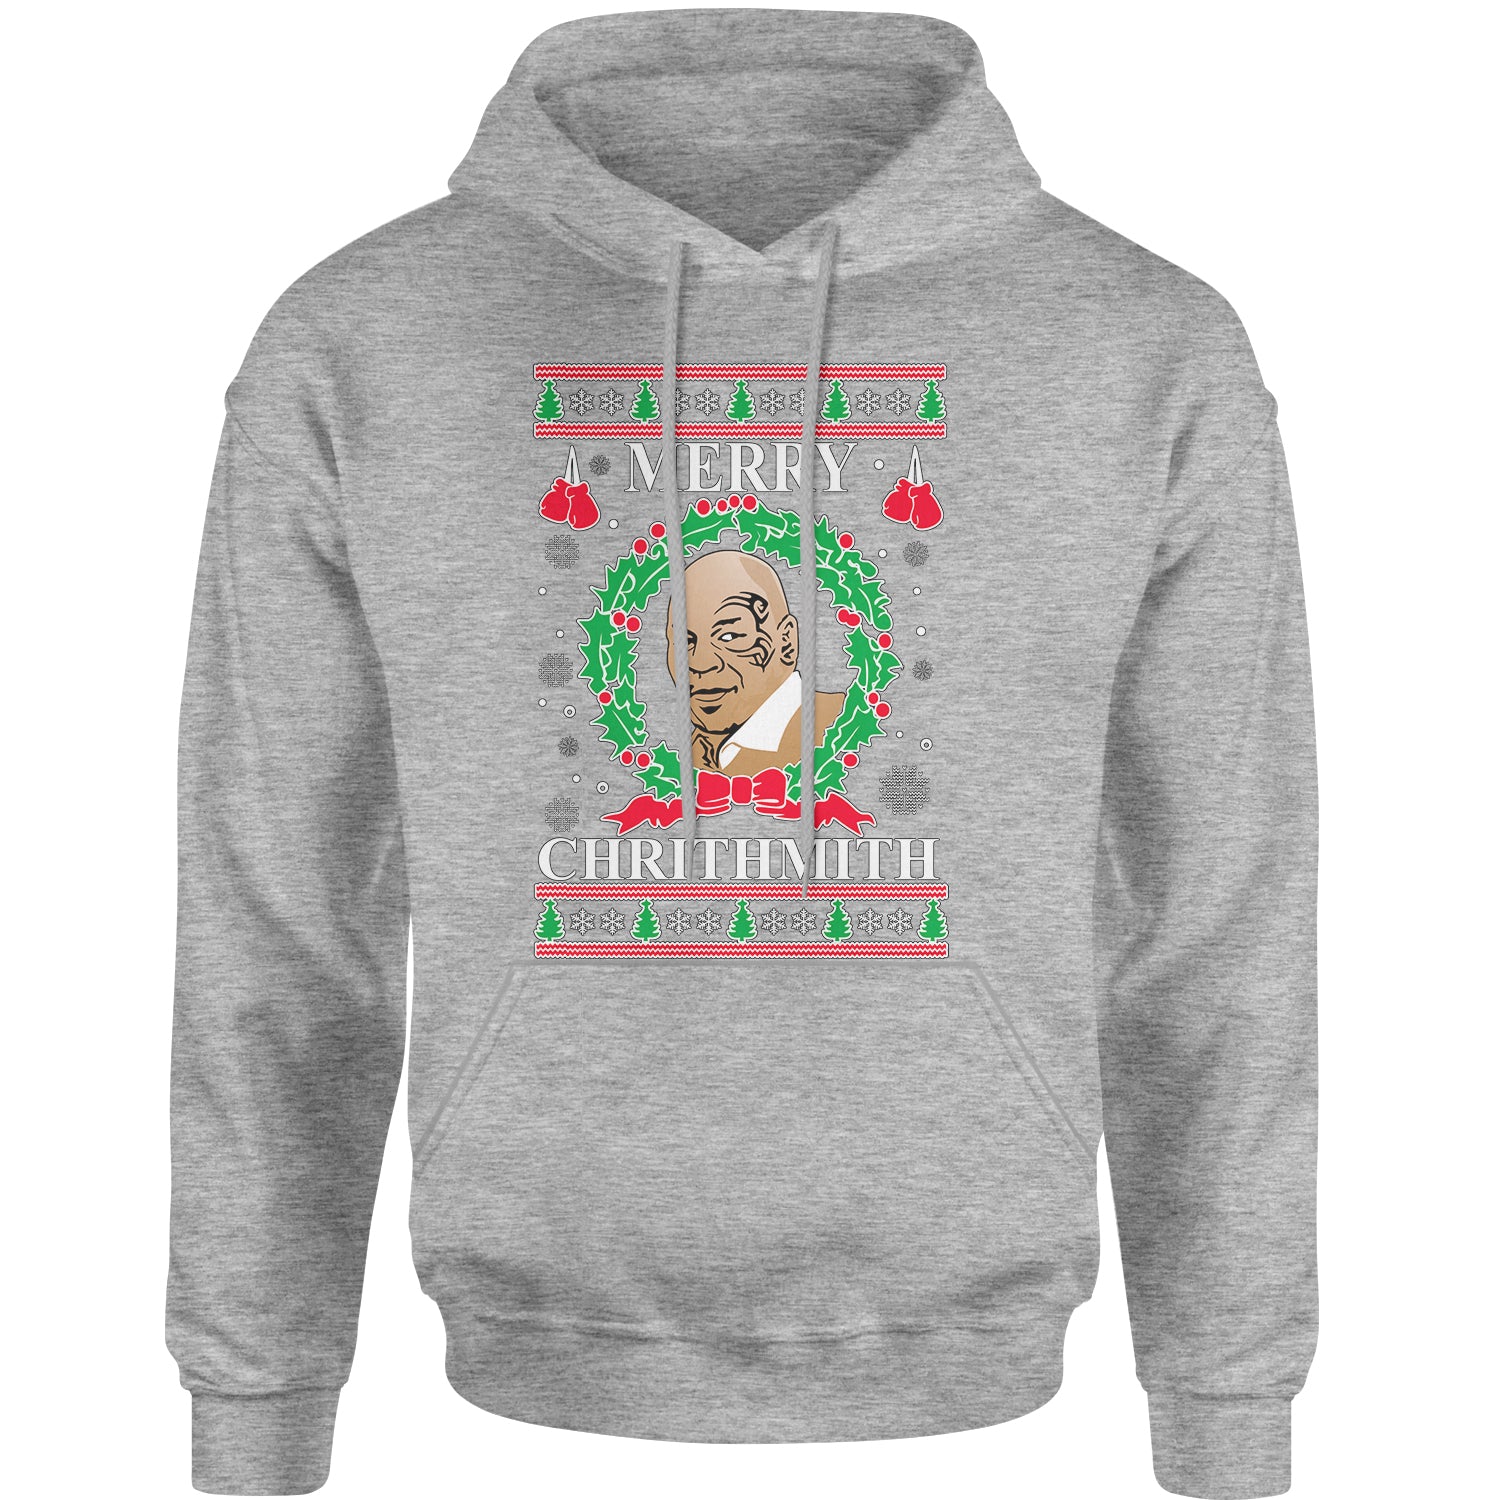 Merry Chrithmith Ugly Christmas Adult Hoodie Sweatshirt christmas, holiday, michael, mike, sweater, tyson, ugly by Expression Tees